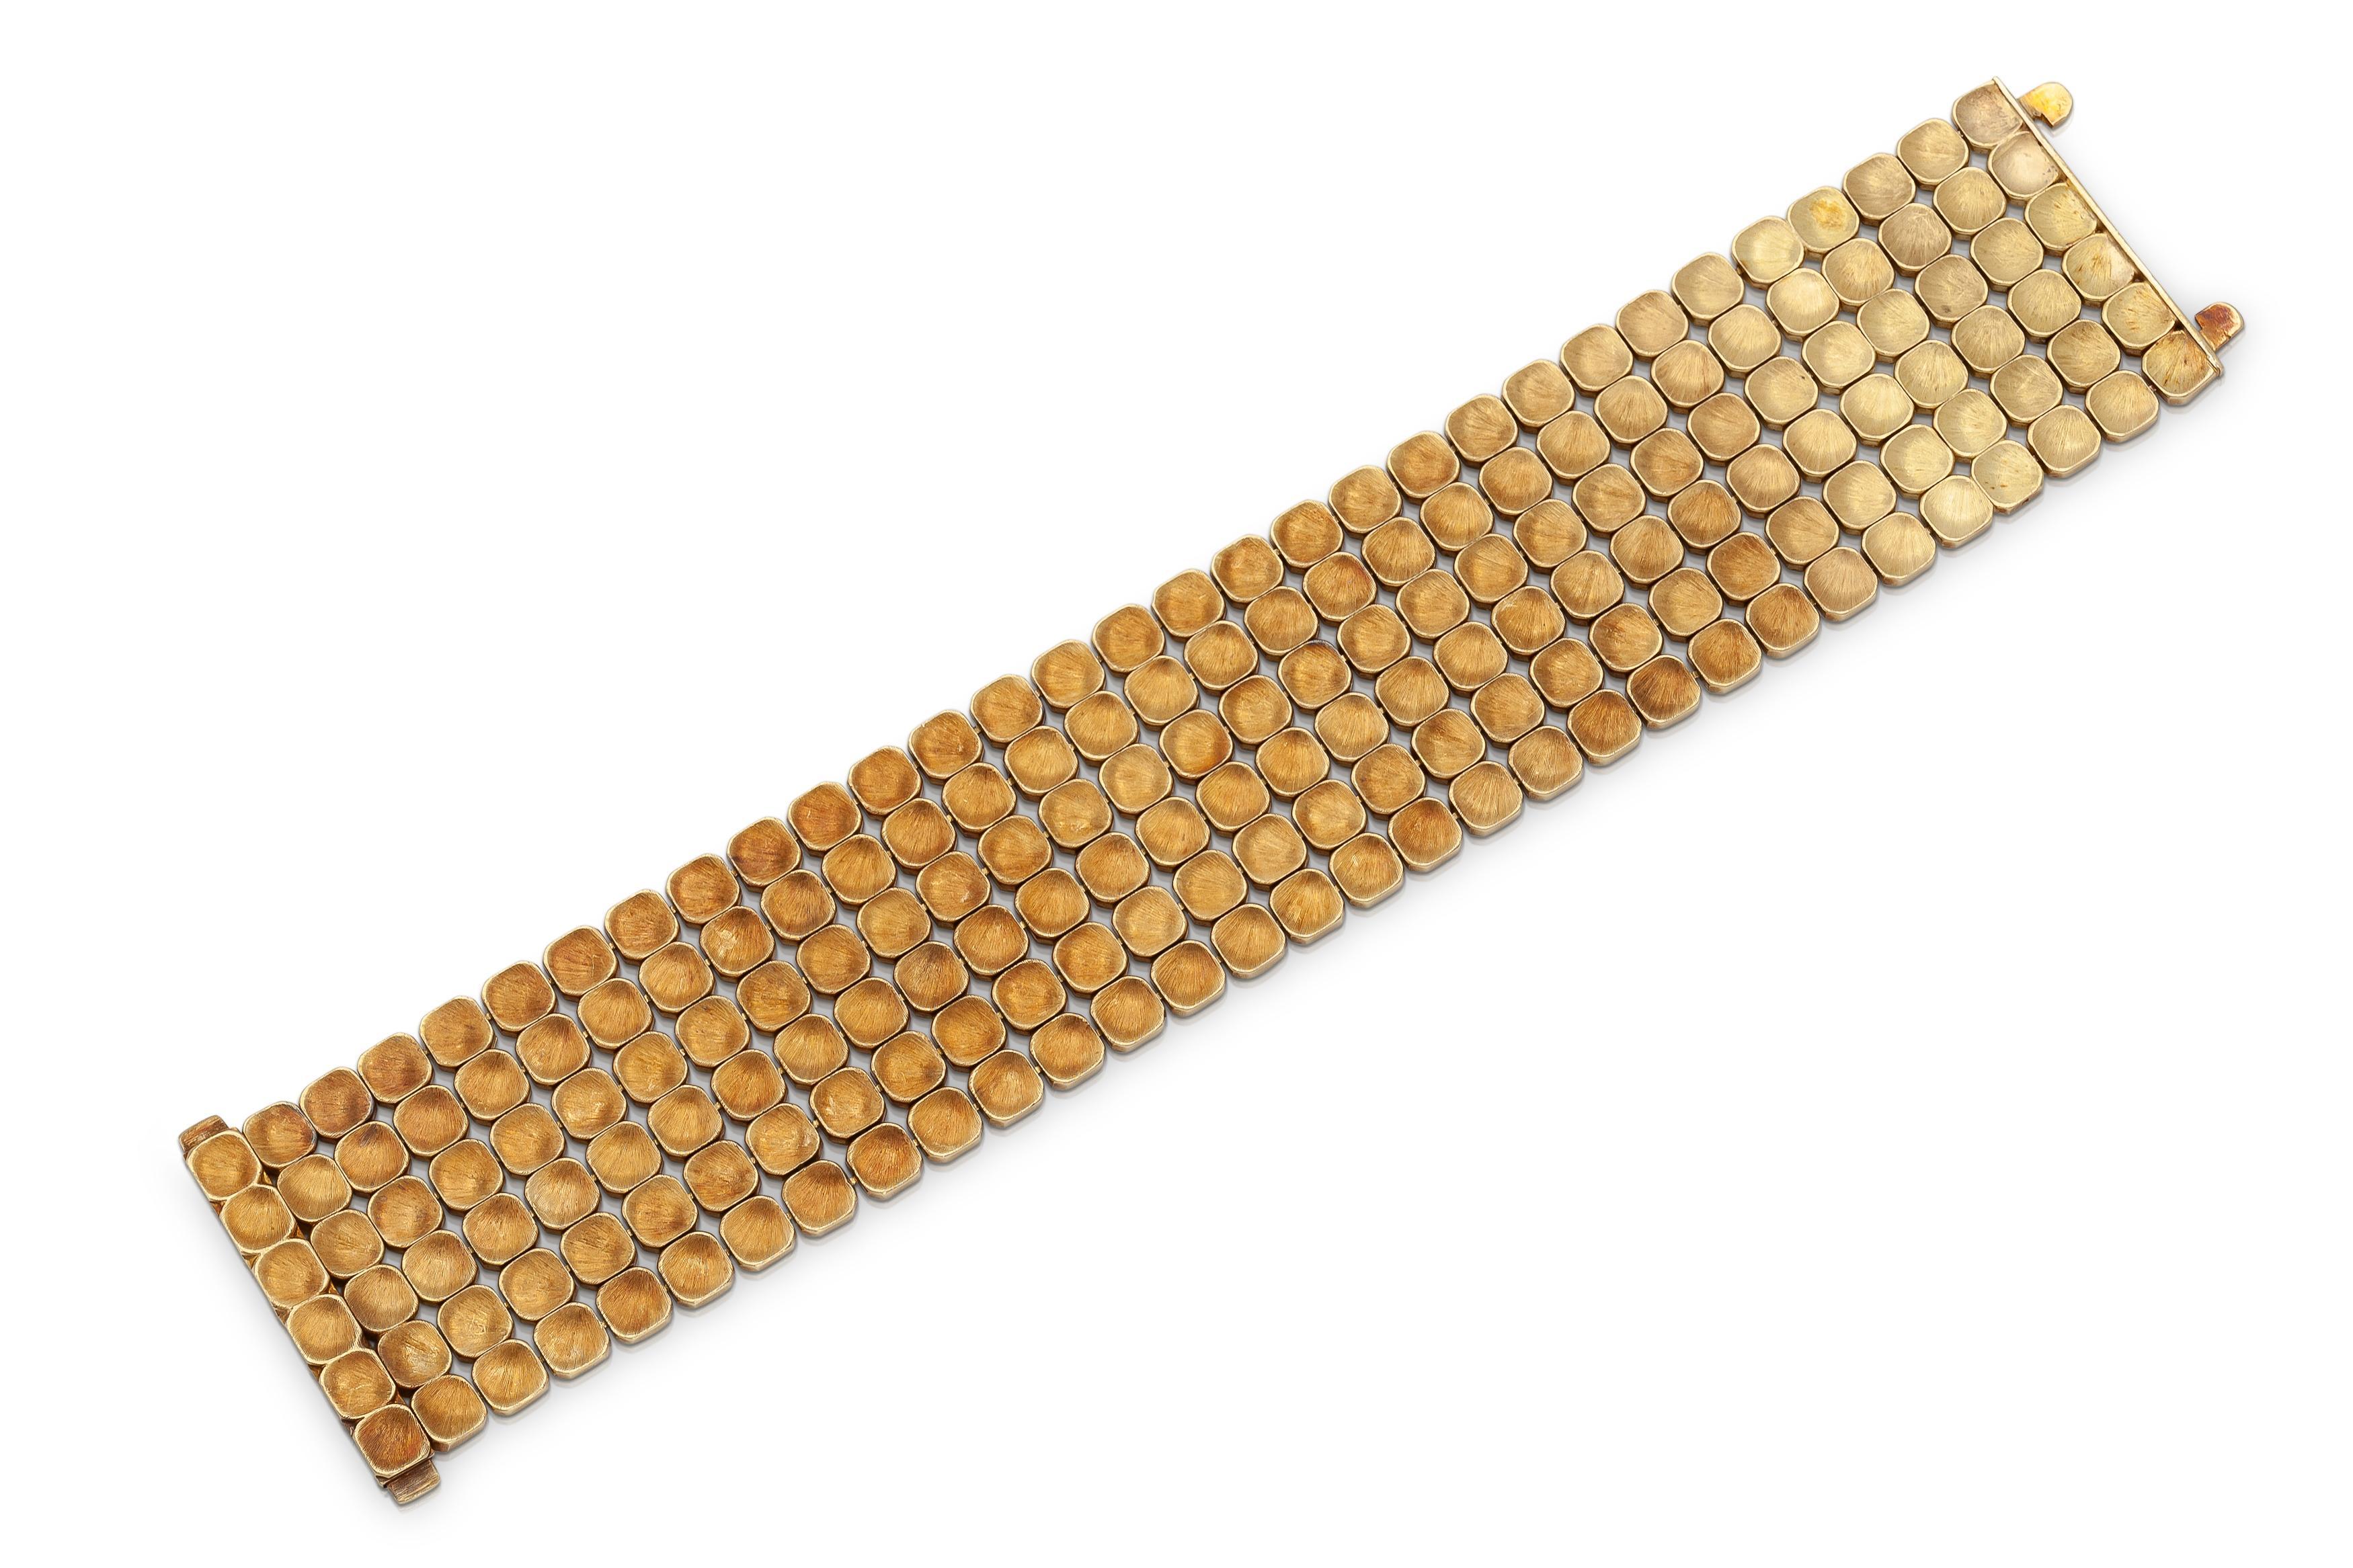 Finely crafted in 18k yellow gold.
Signed by Mario Buccellati
Made in Italy
Size 7 3/4 inches